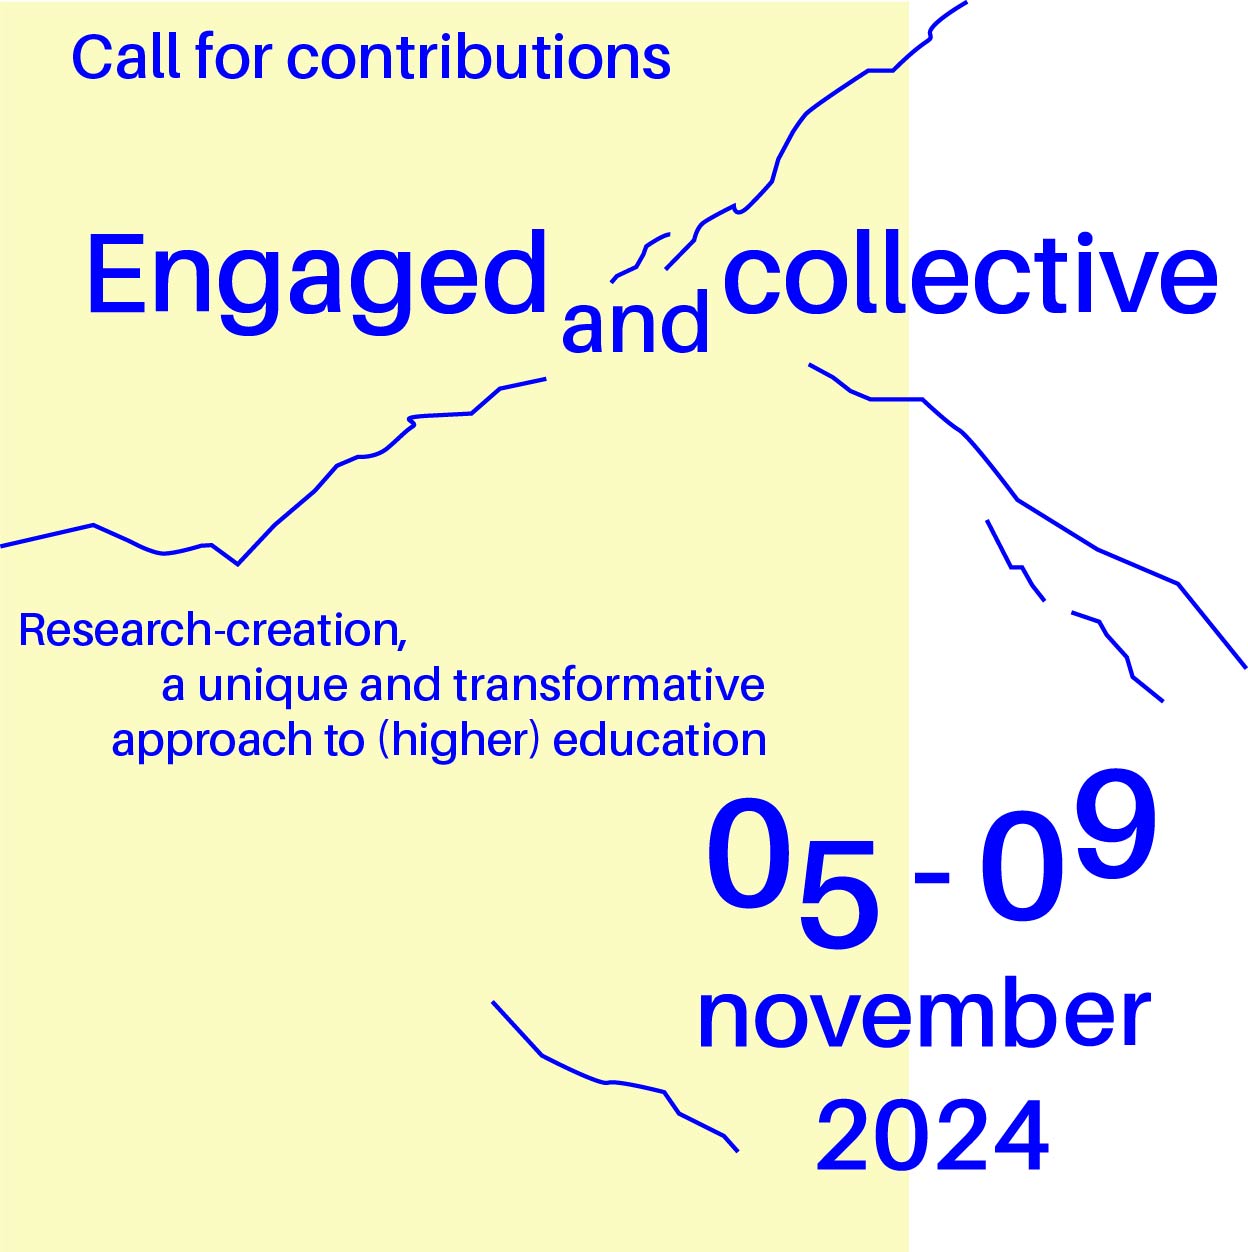 Engaged and collective: Research-creation, a unique and transformative approach to (higher) education 